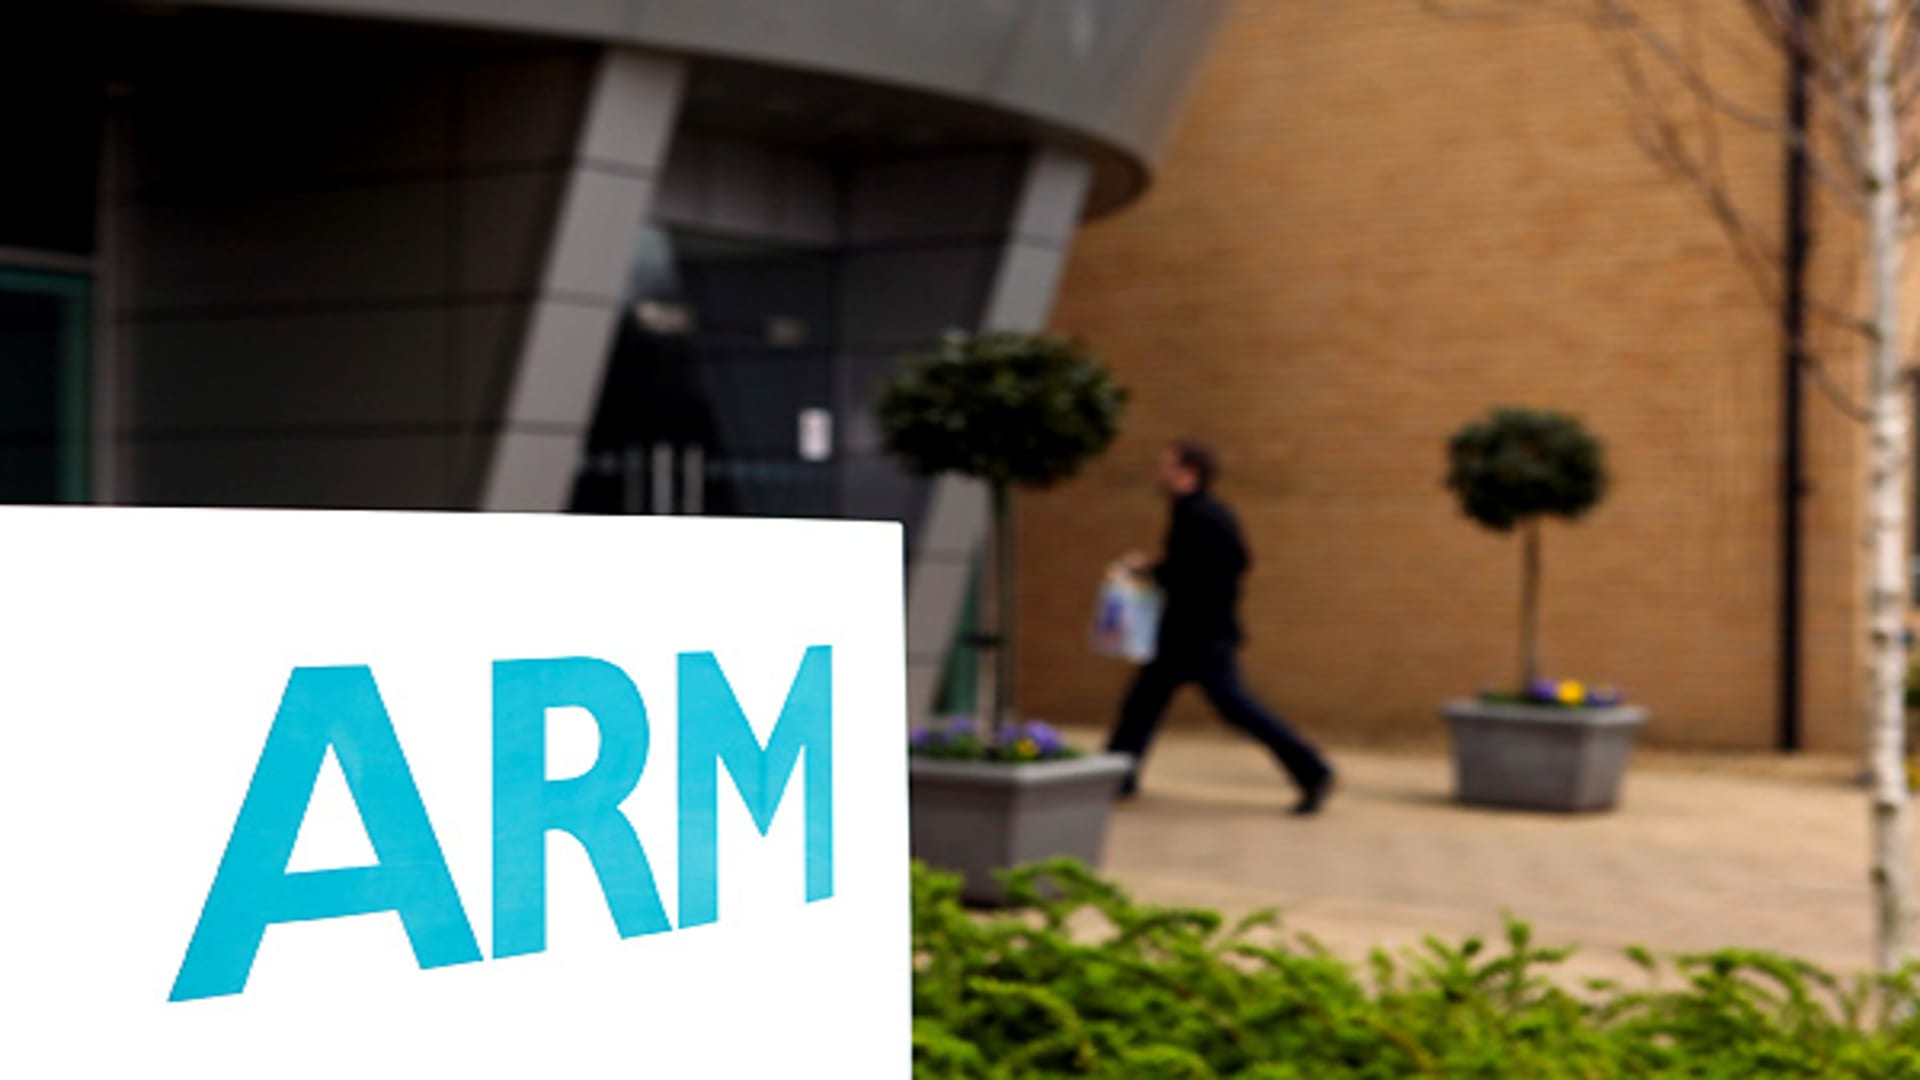 The Arm IPO is here, but many ETFs will not be buyers